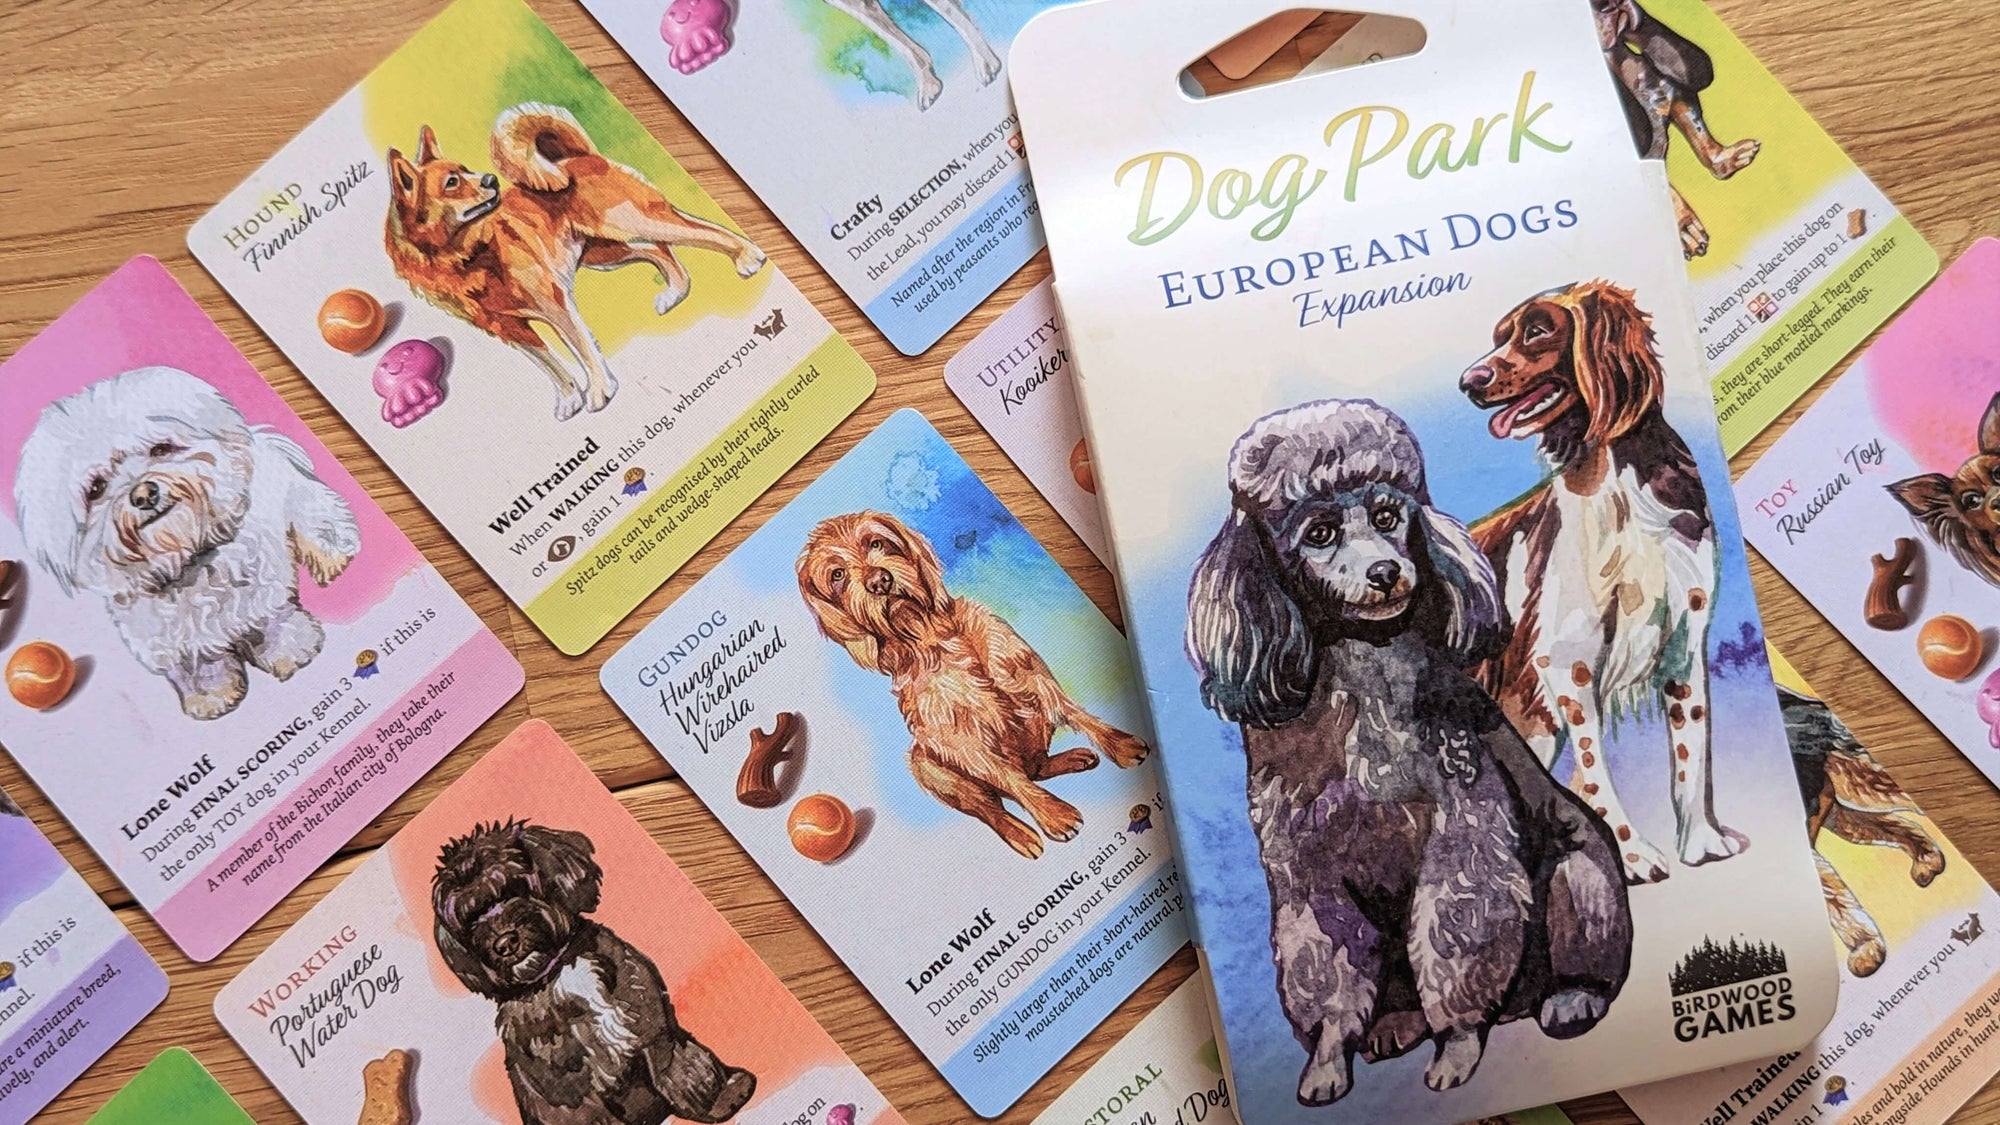 Hailing from Europe: The Dog Park European Dogs Expansion Pack